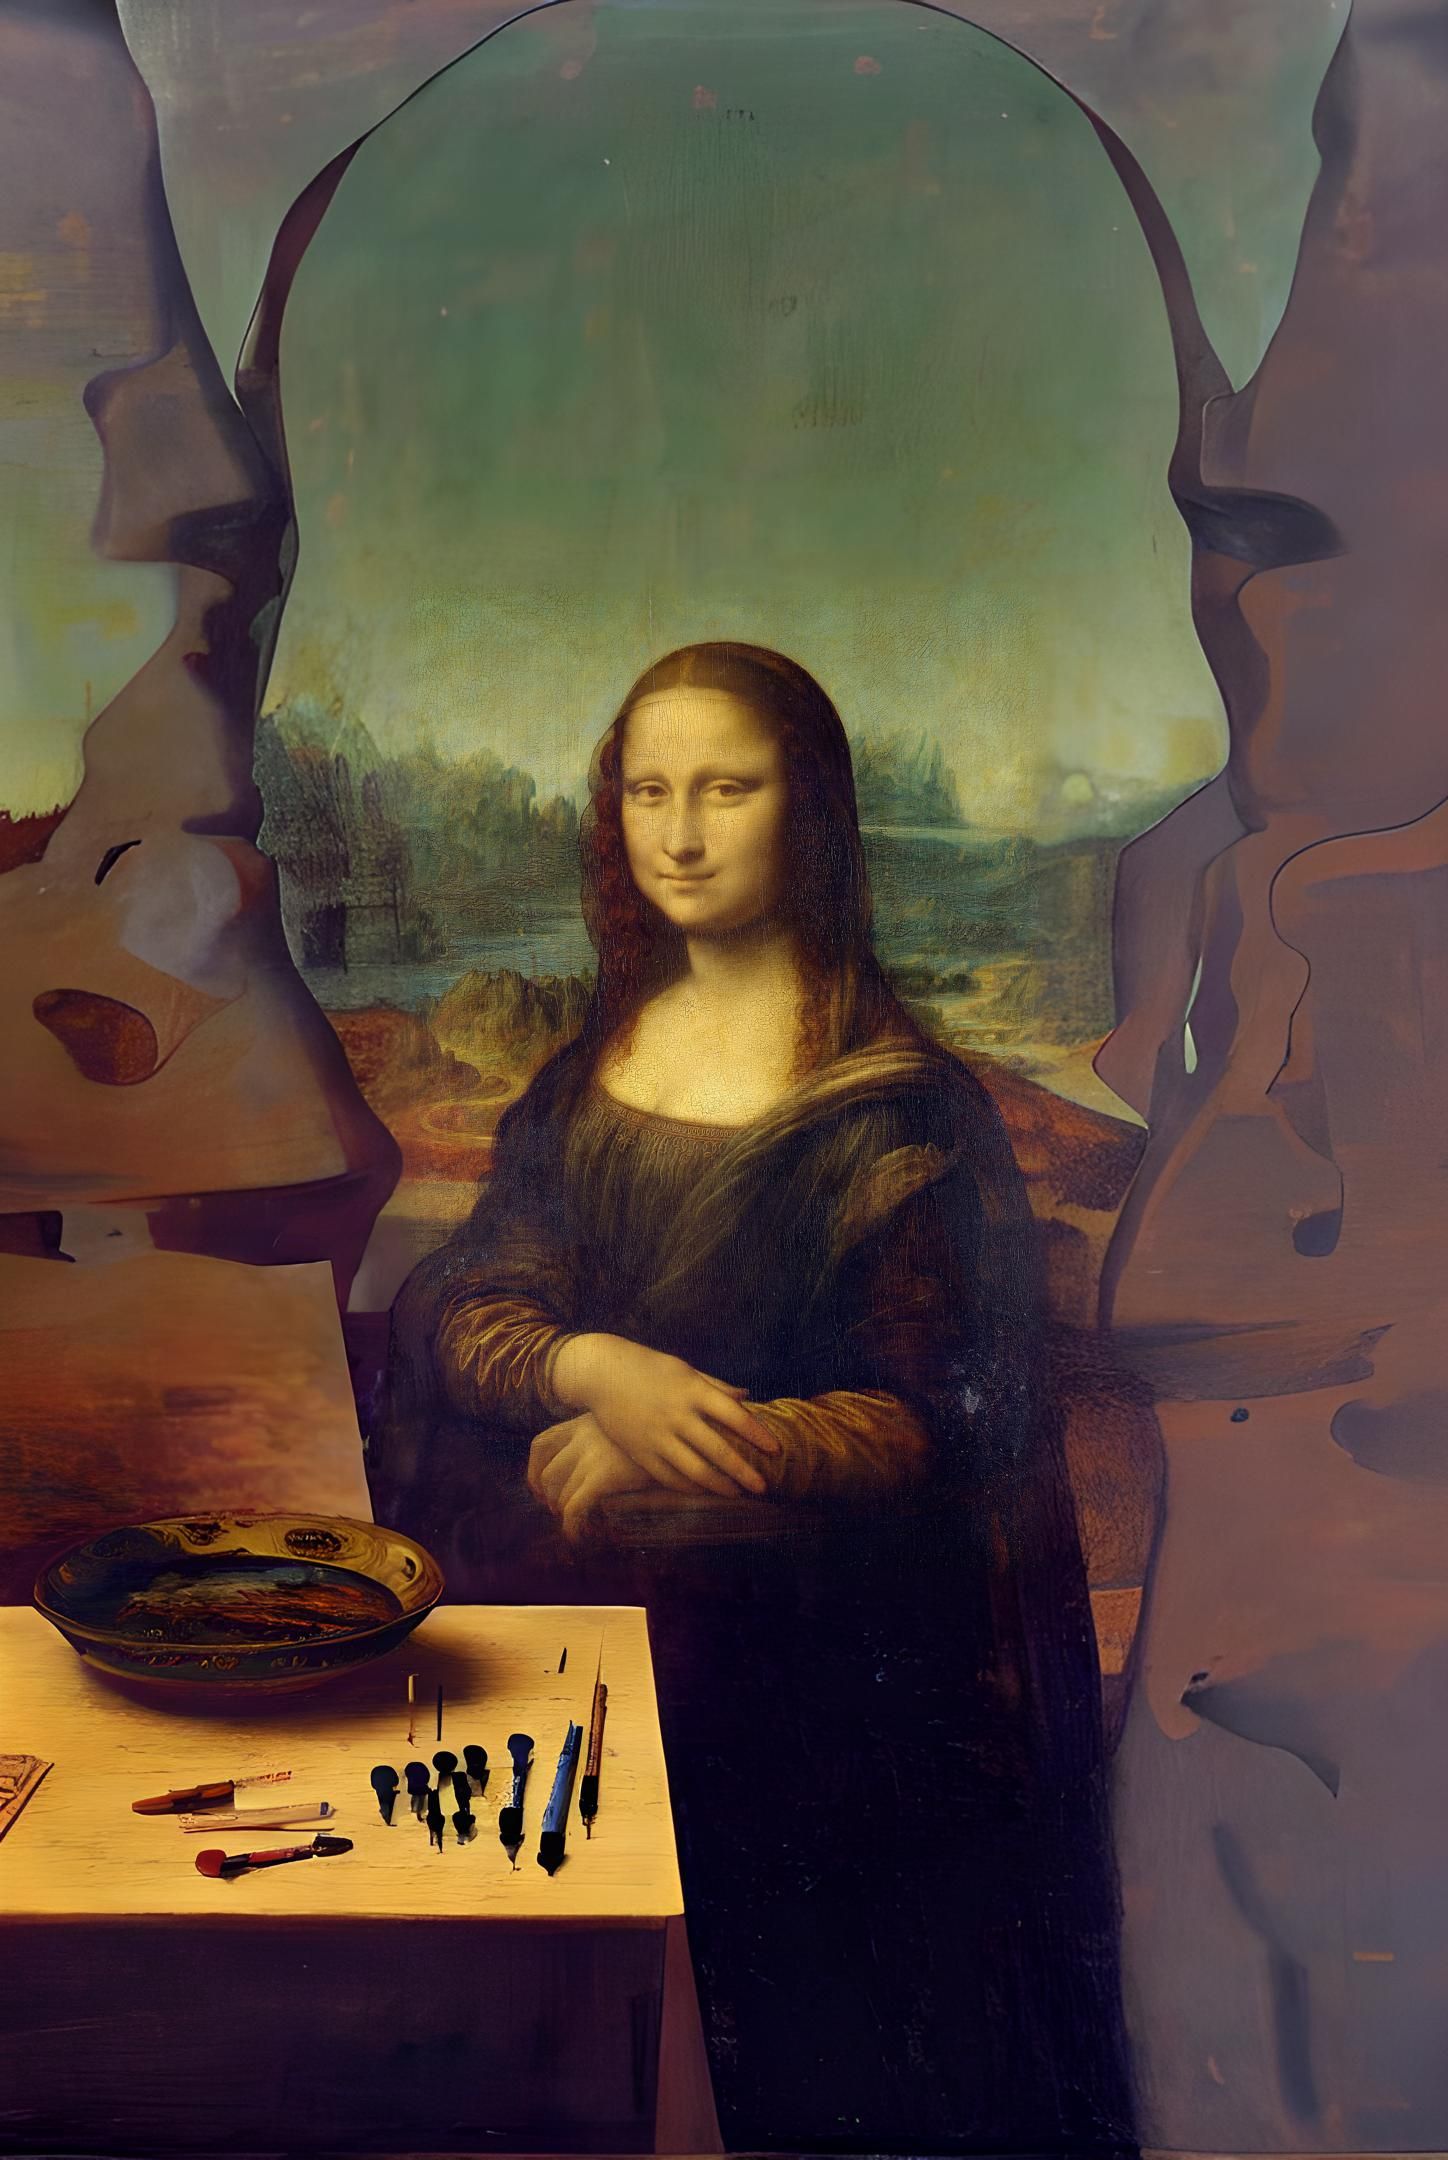 a zoomed out depiction of the famous Mona Lisa sitting in front a table with art supplies